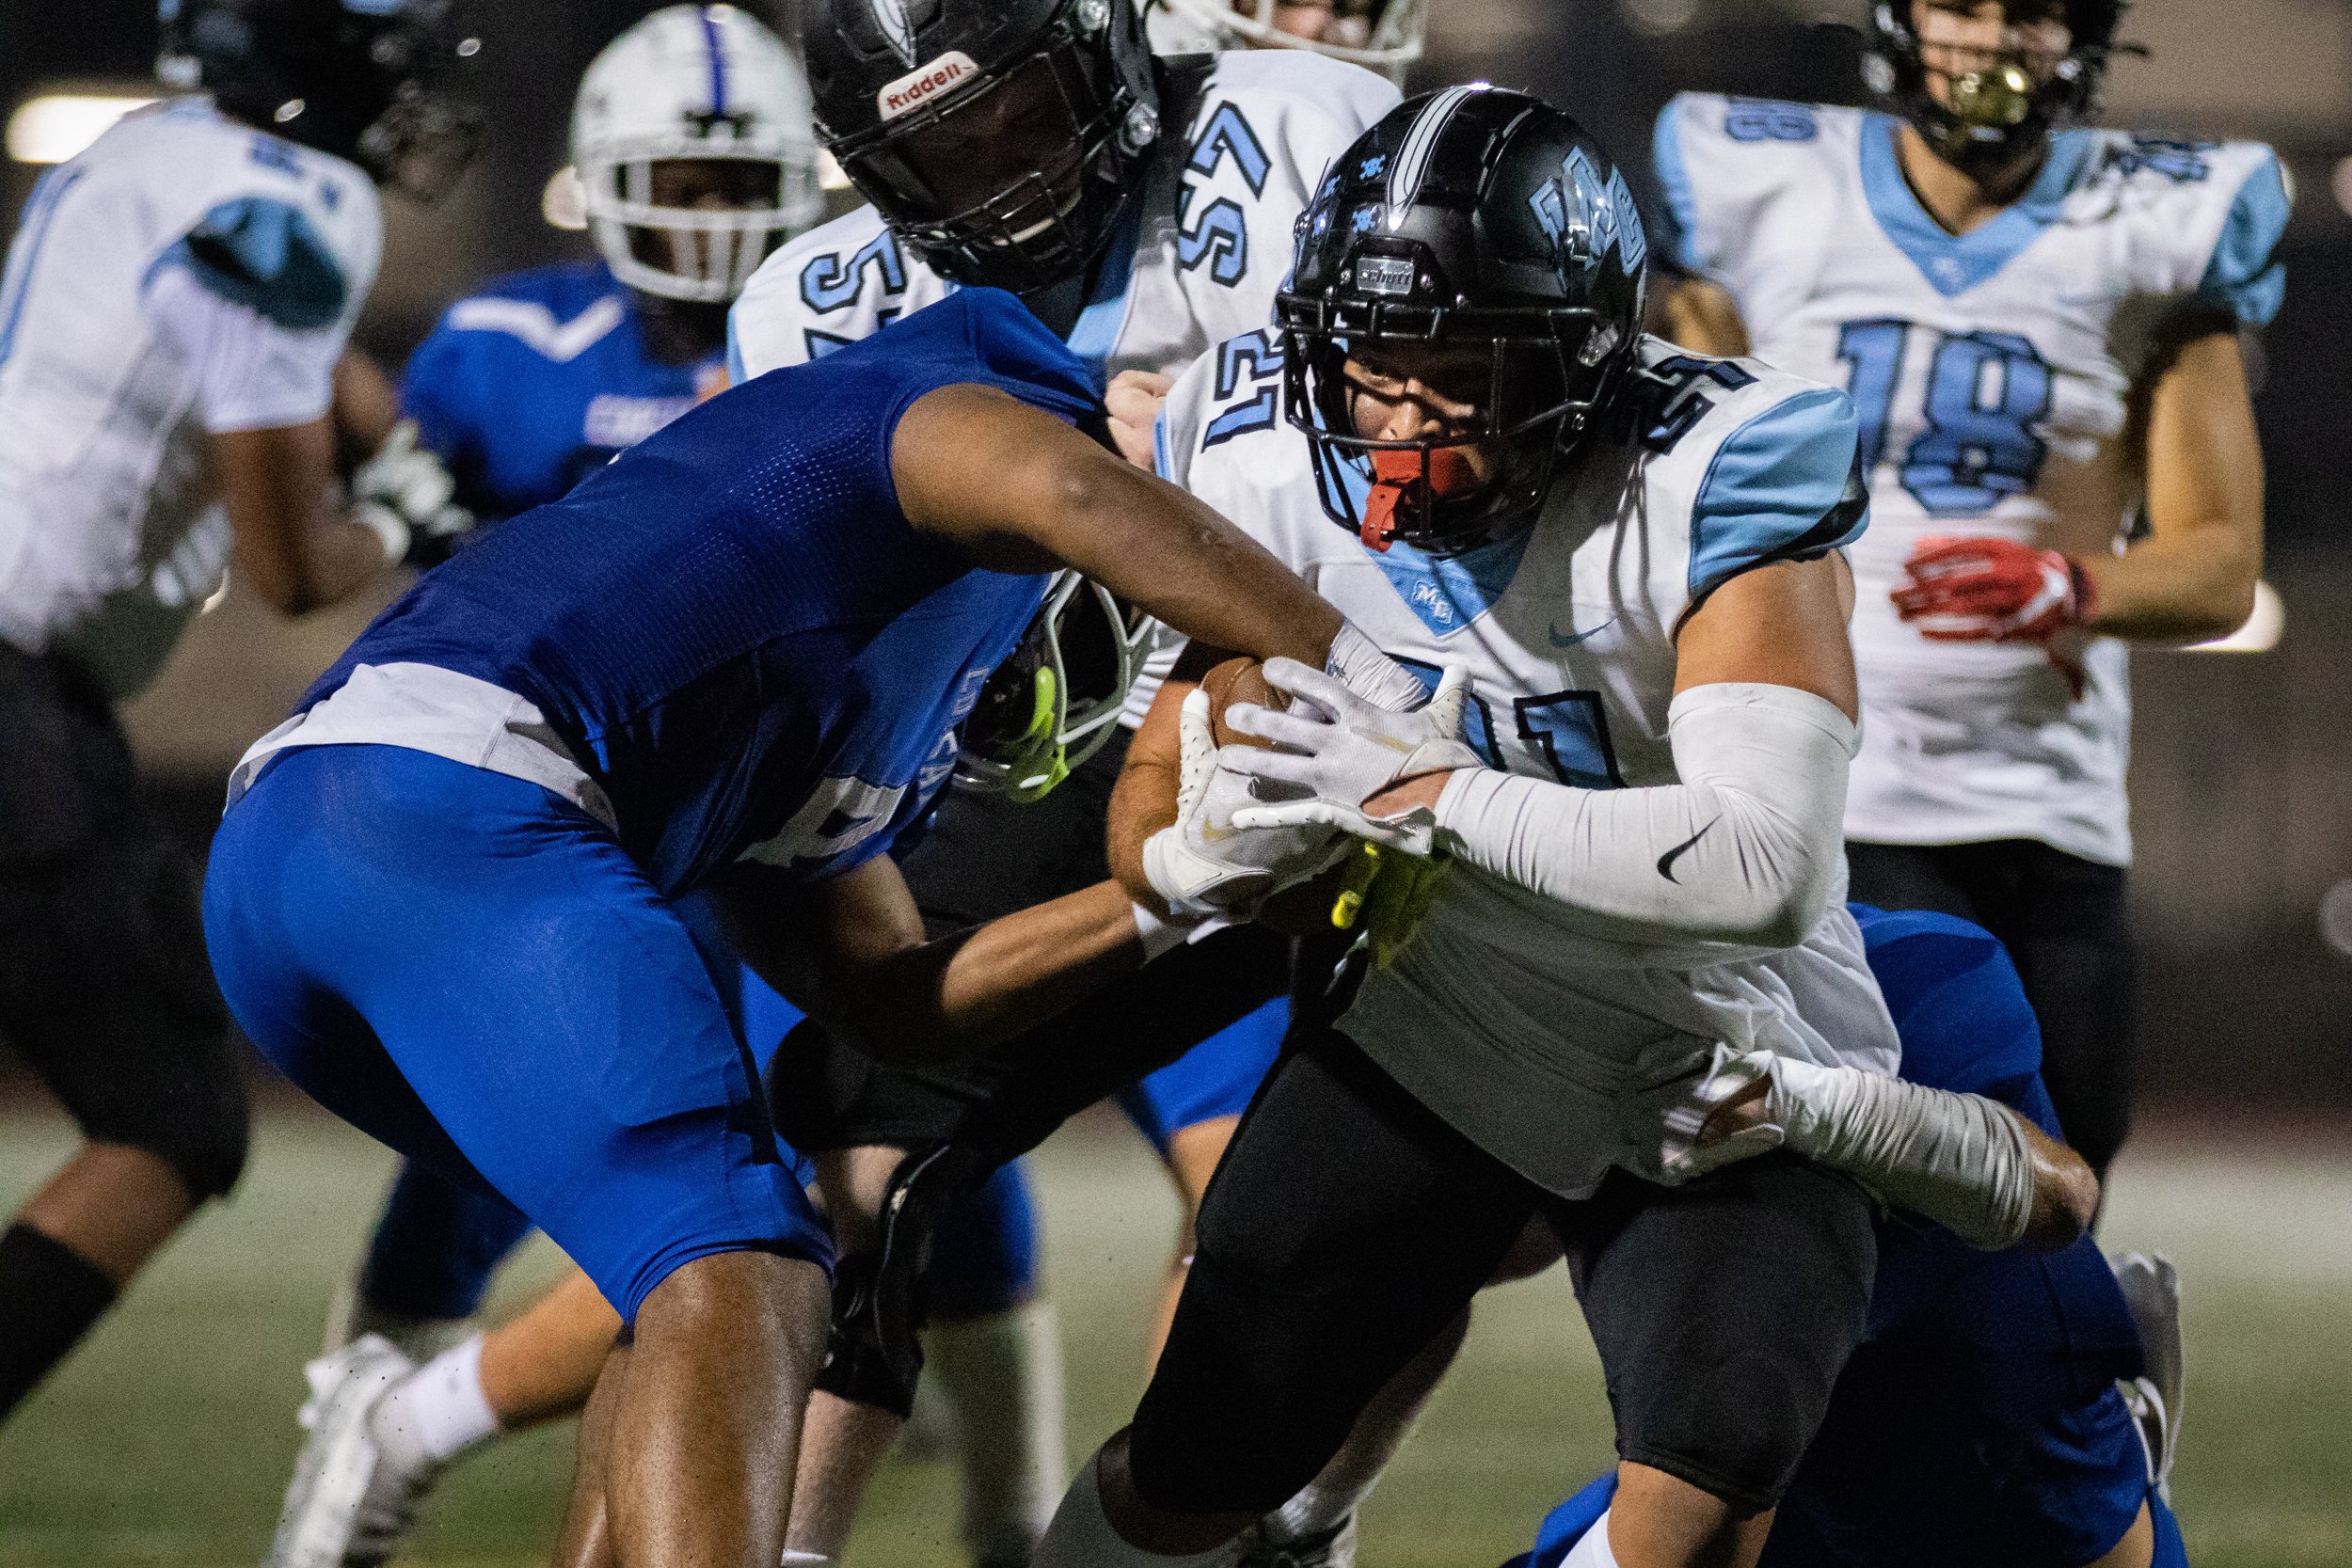  Santa Monica College Corsair linebacker Raejion Baker (4, left) attempting to grab the ball from Moorpark College Raider runningback Gabe Landless (21, right), who is also being tackled by Corsair defensive back Maximillian Palees (11), during the s